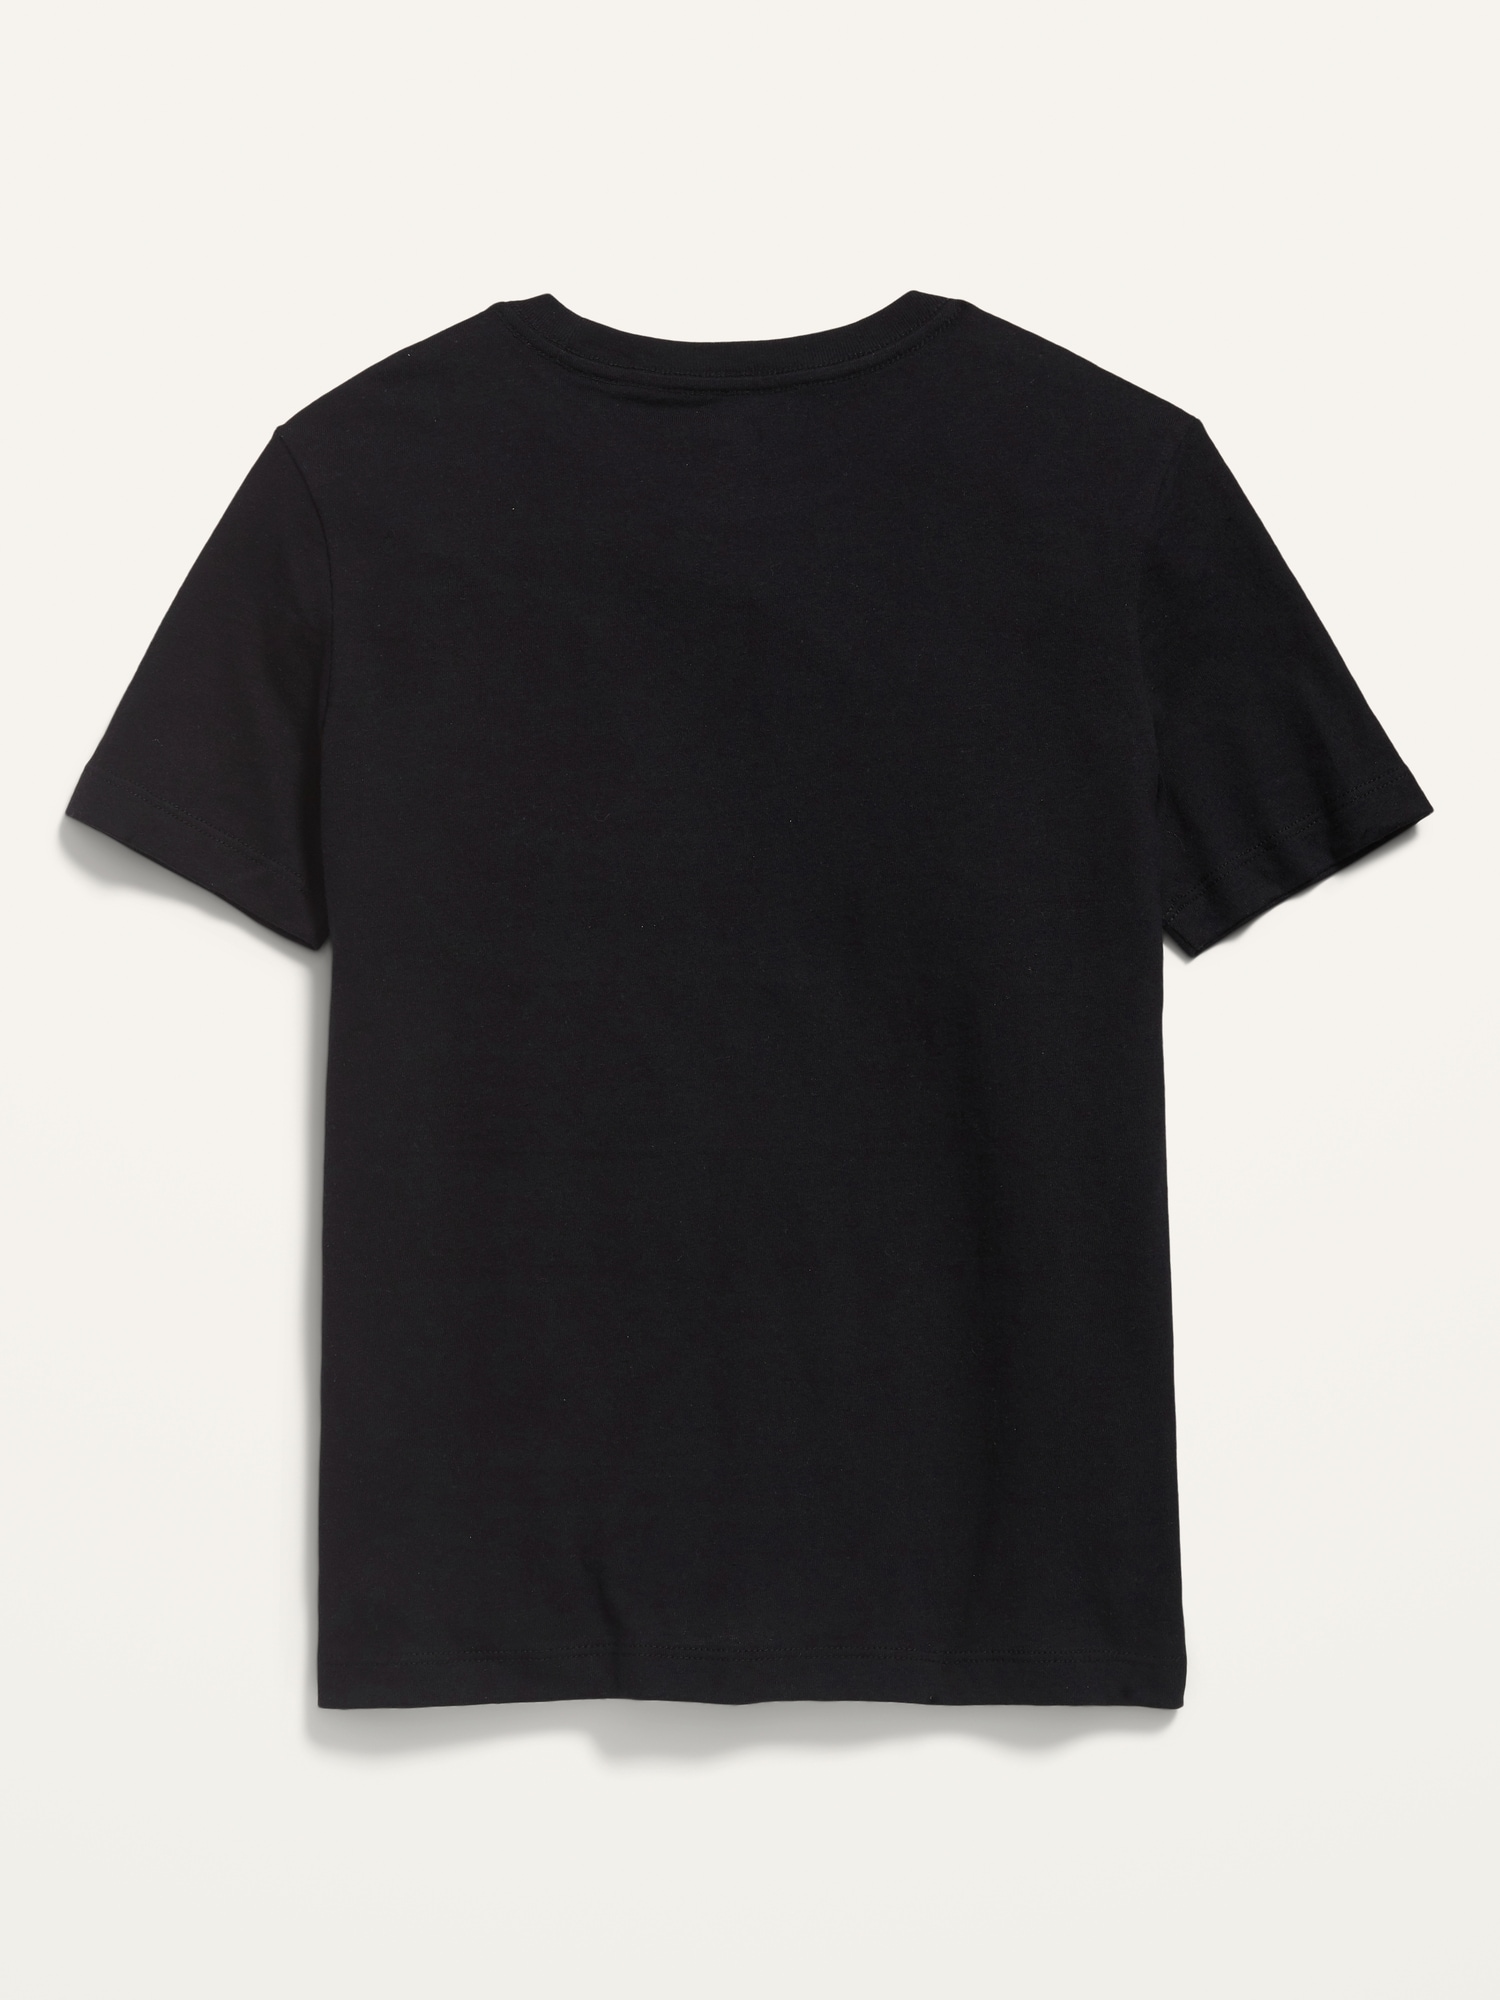 Graphic Short-Sleeve T-Shirt For Boys | Old Navy